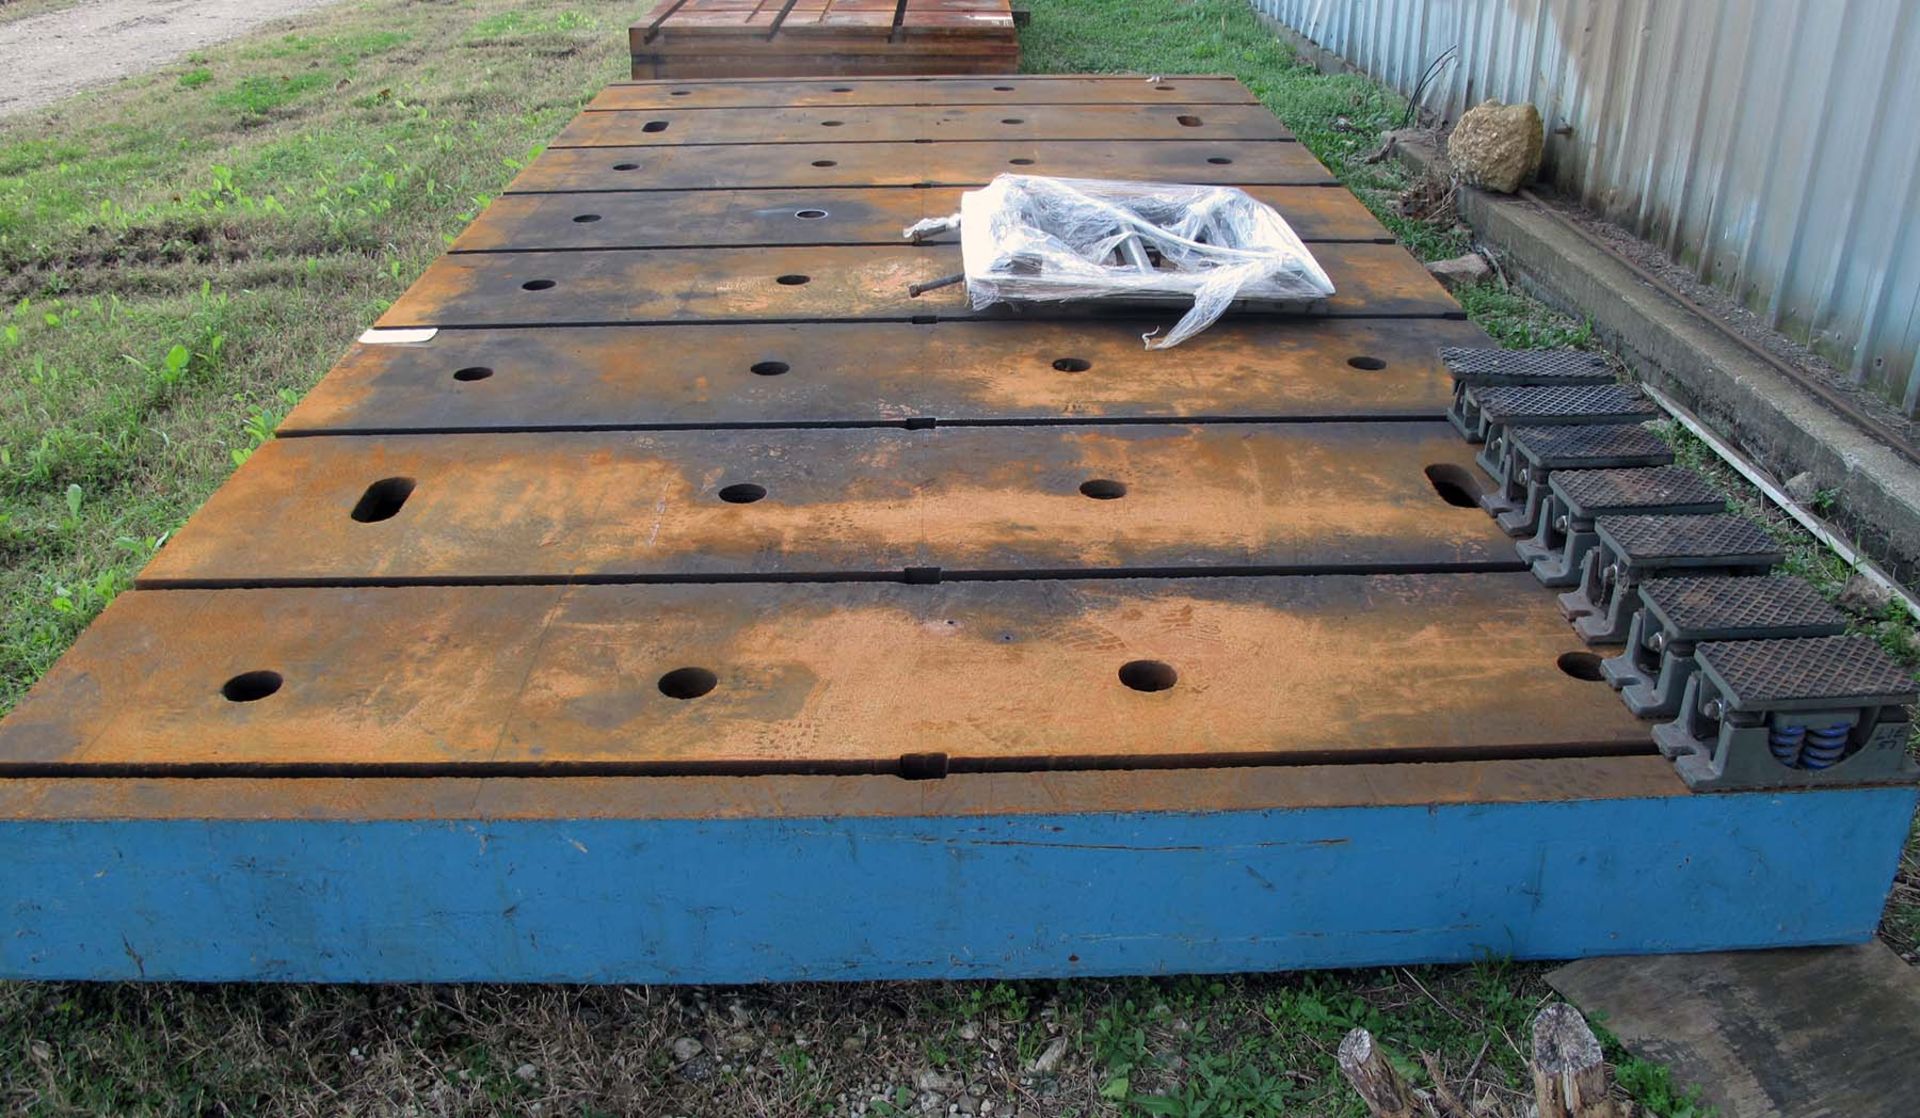 T-SLOTTED FLOOR PLATE, 15' x 8' x 10" thk. - Image 2 of 5